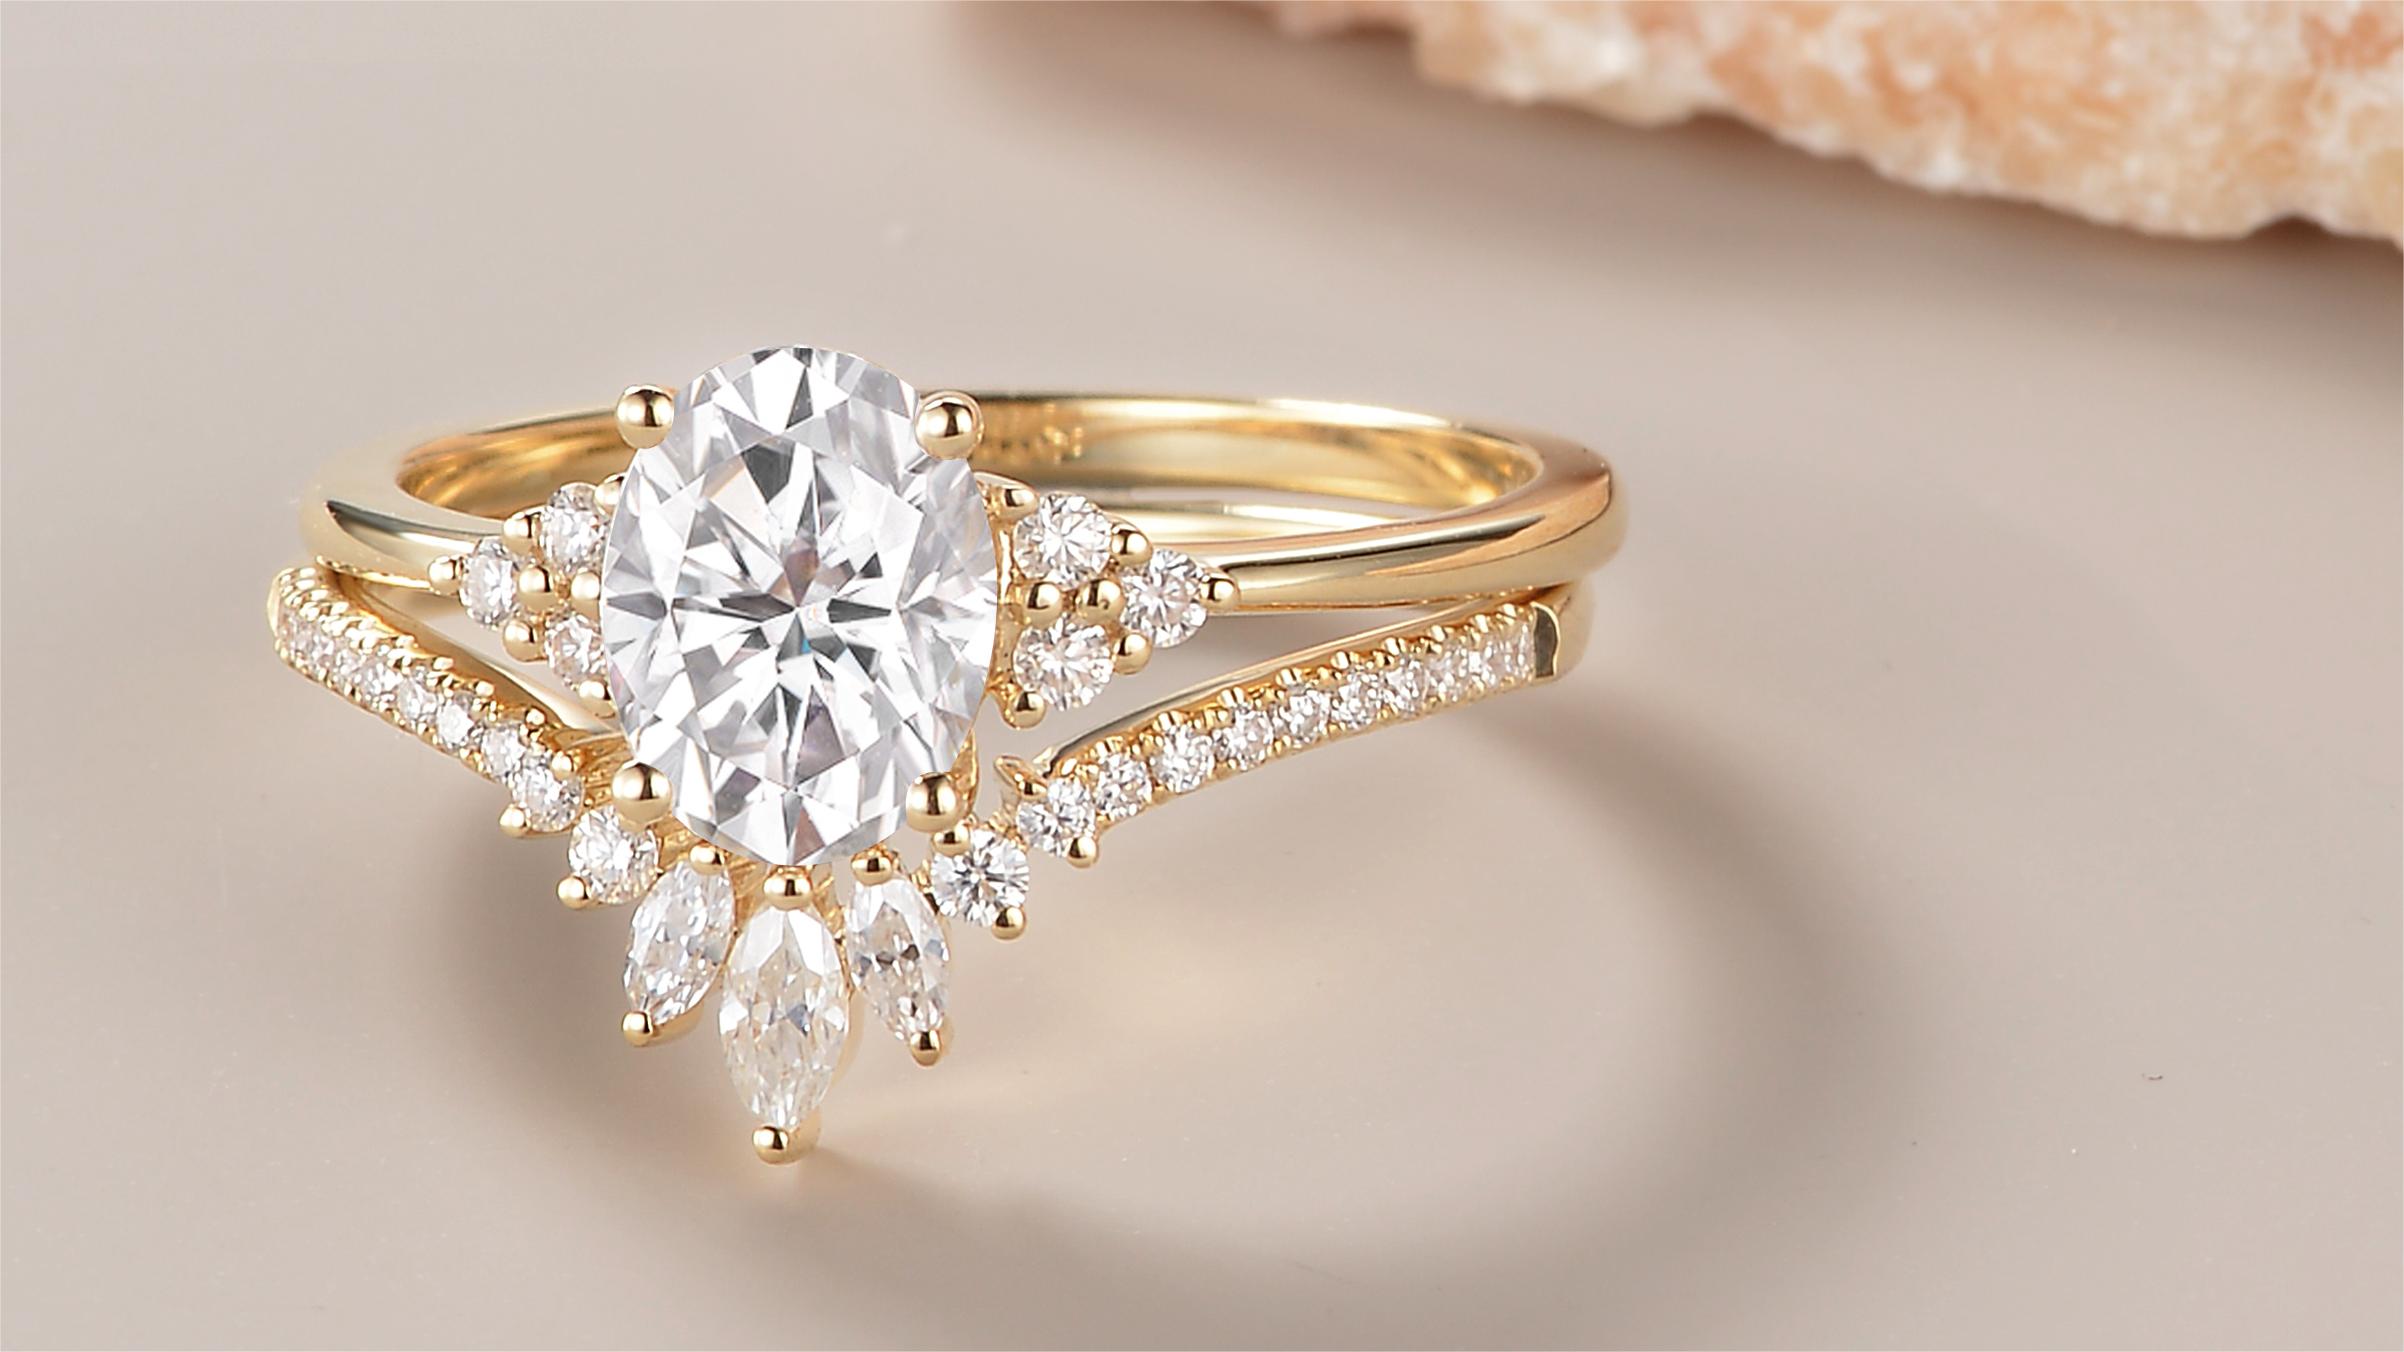 How do Moissanite Accent Stones Contribute to Enhancing the Radiance of the 